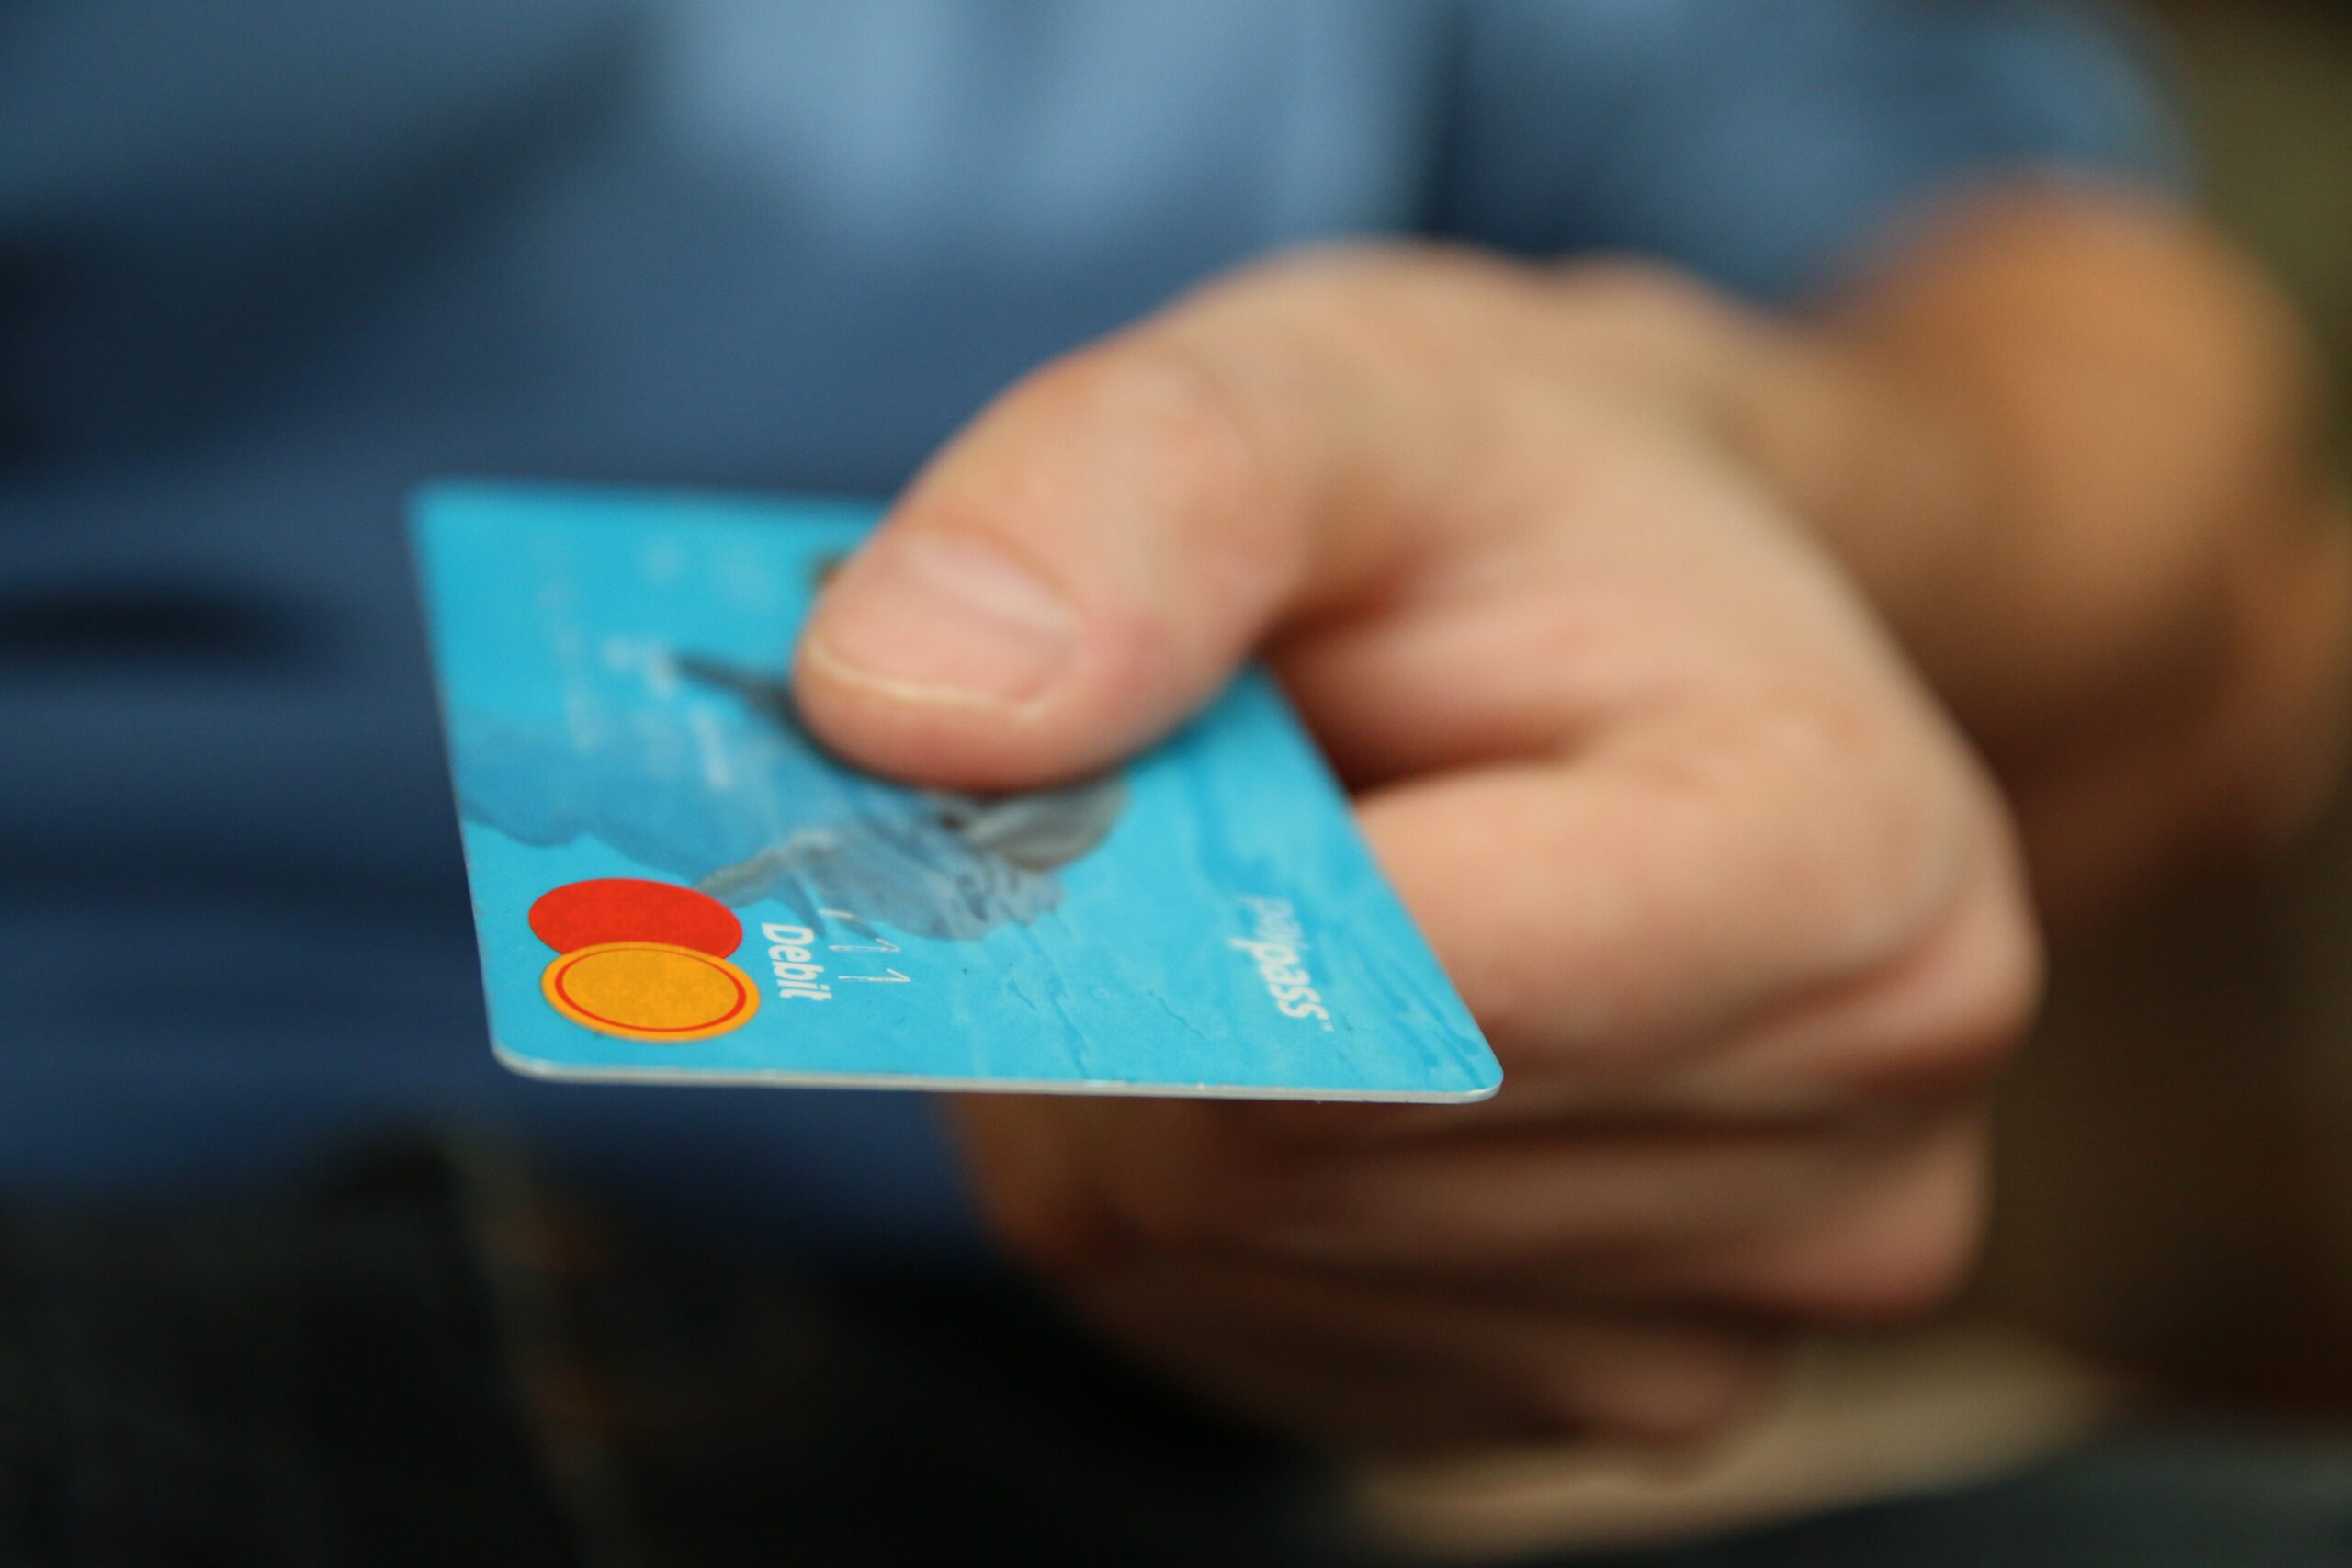 Scottish officials given new rules for bank-card spending